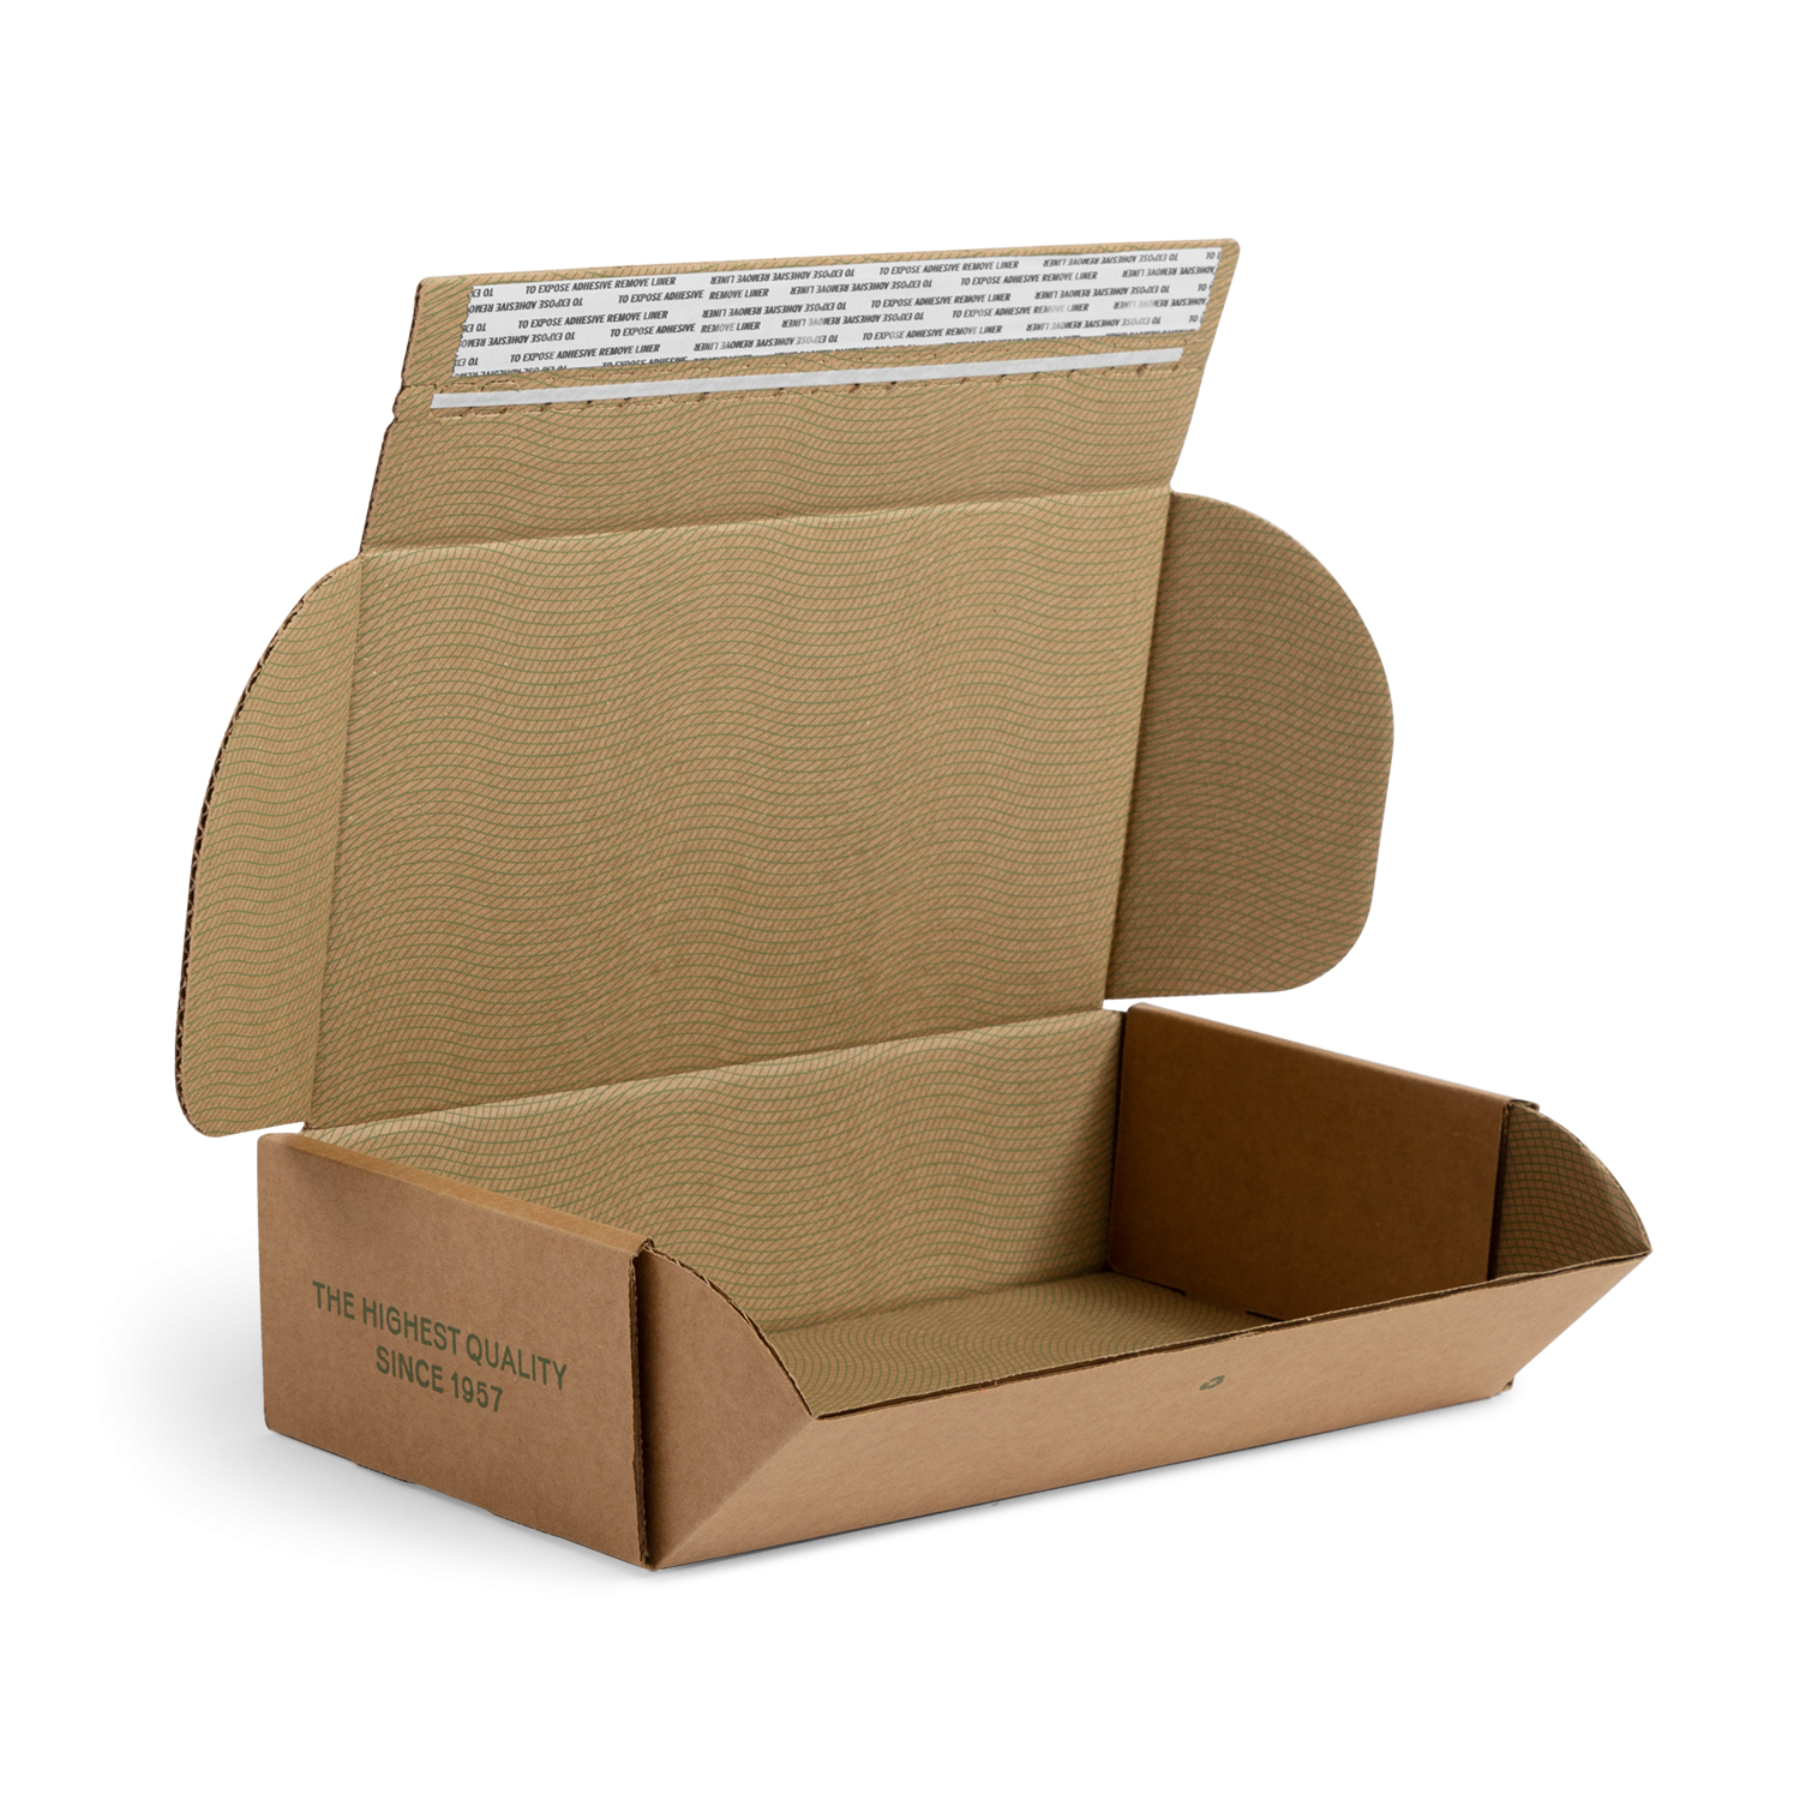 The Spice House uses Lumi to produce mailer boxes with a tear strip and adhesive strip Packaging Strategies for Efficient Returns